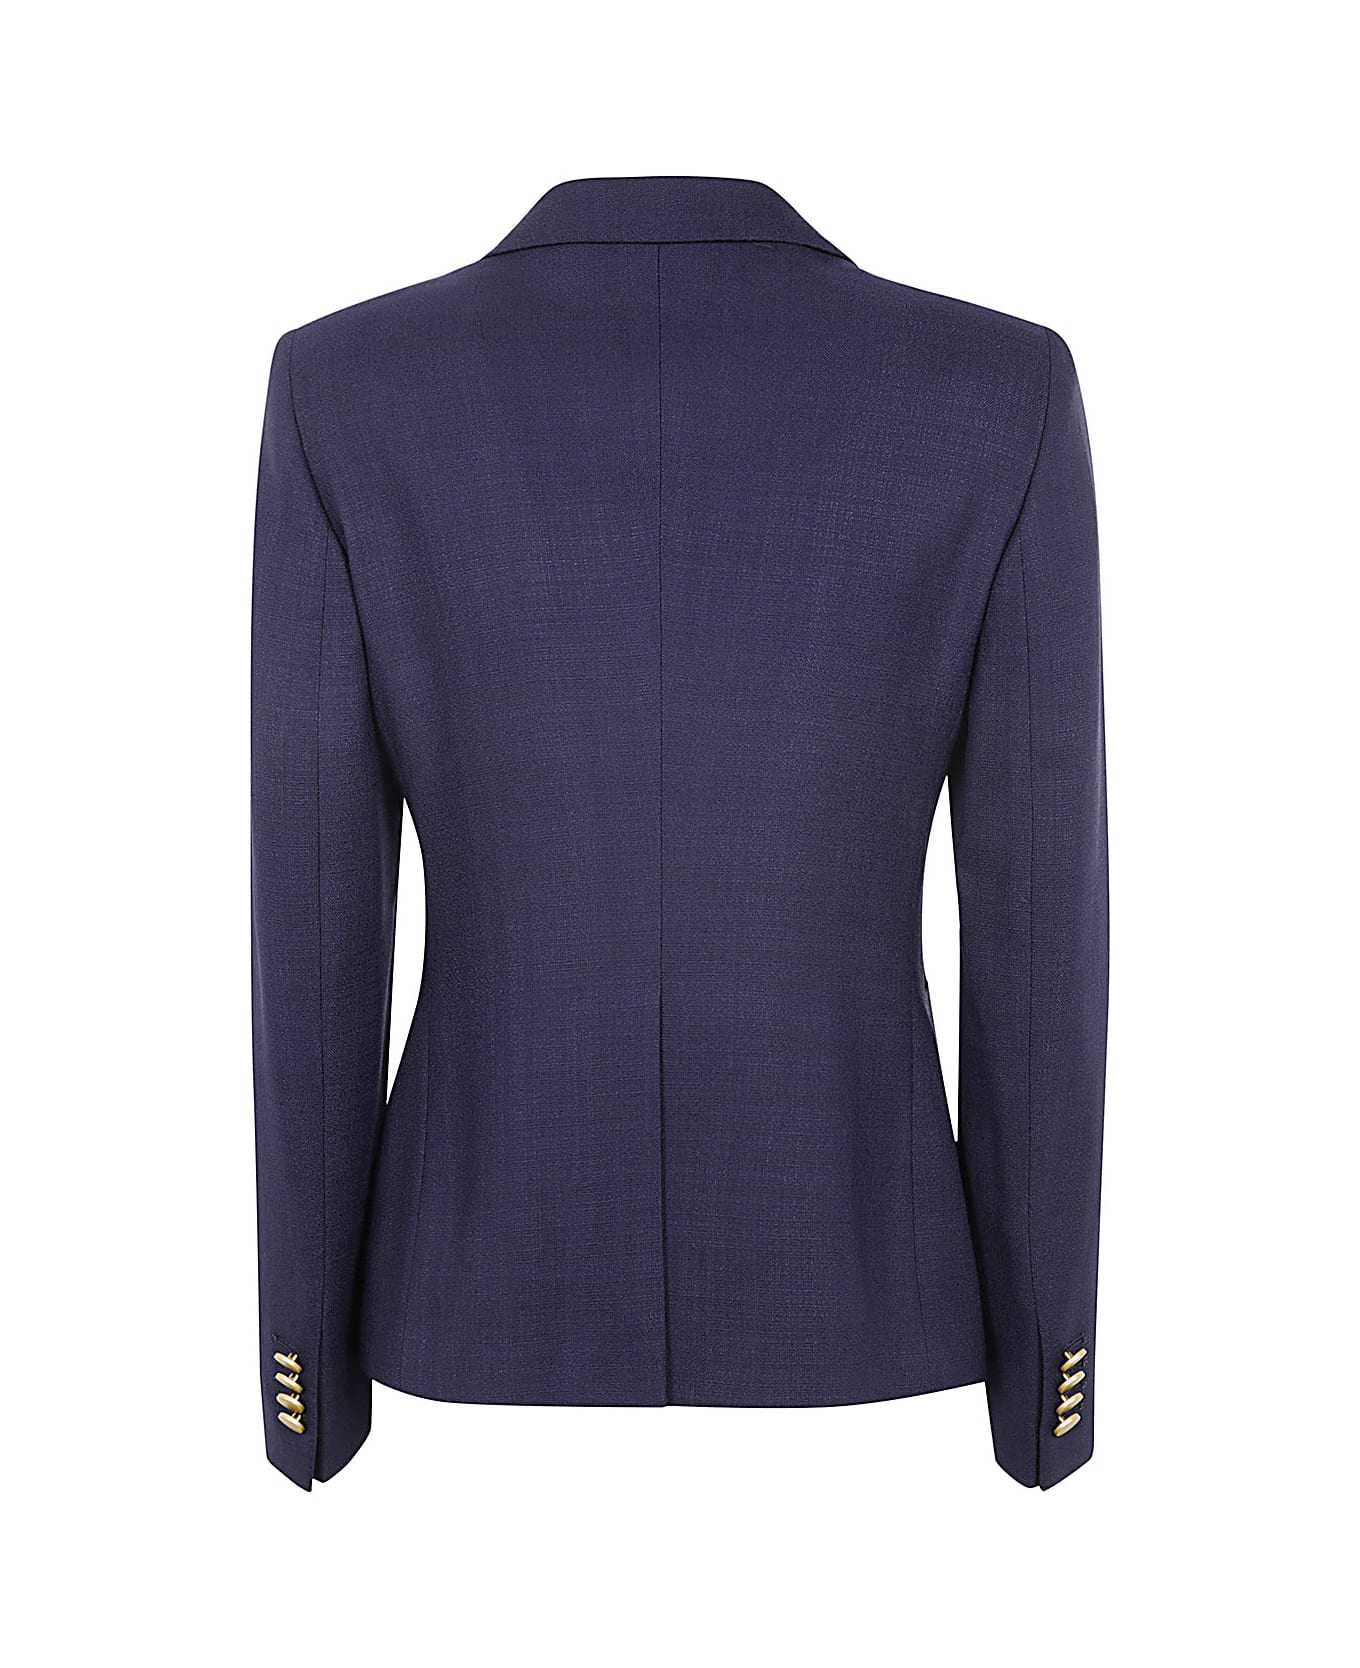 Tagliatore Jcoral Double Breasted Jacket - Blue